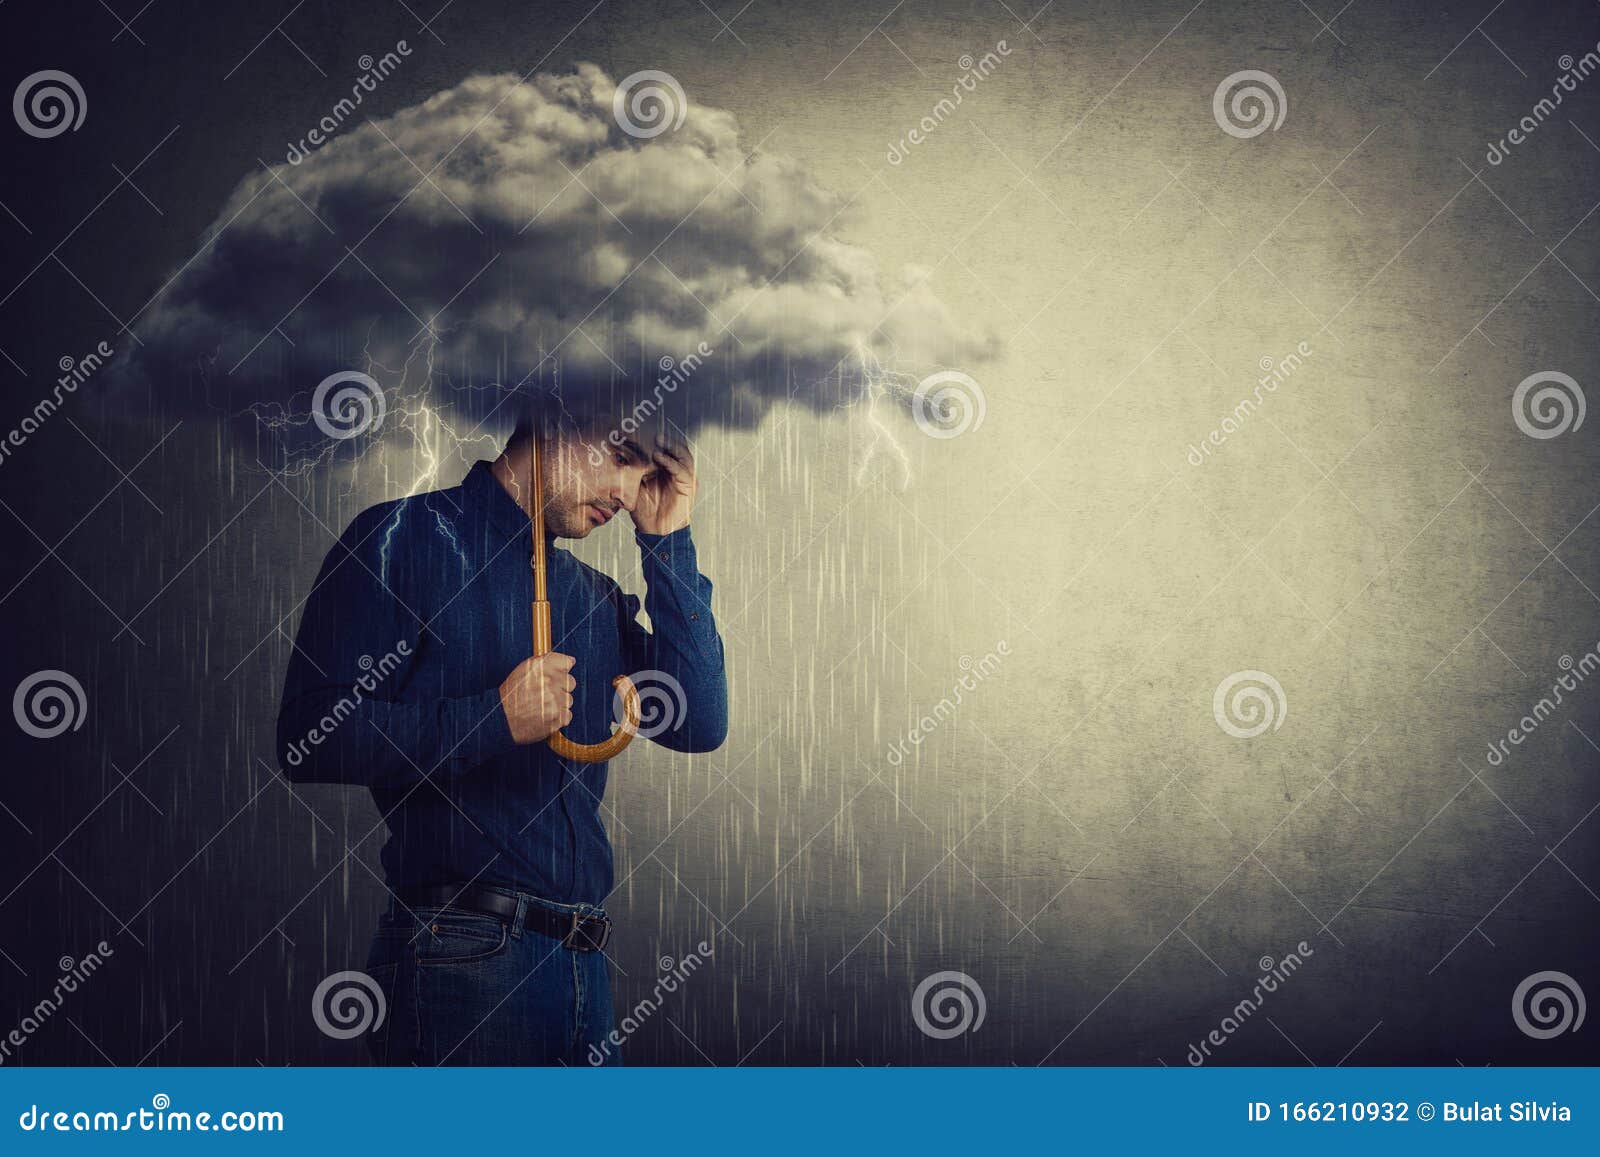 pessimistic man, standing under rain, suffering anxiety as holding an umbrella thunderstorm cloud over head. concept of memory